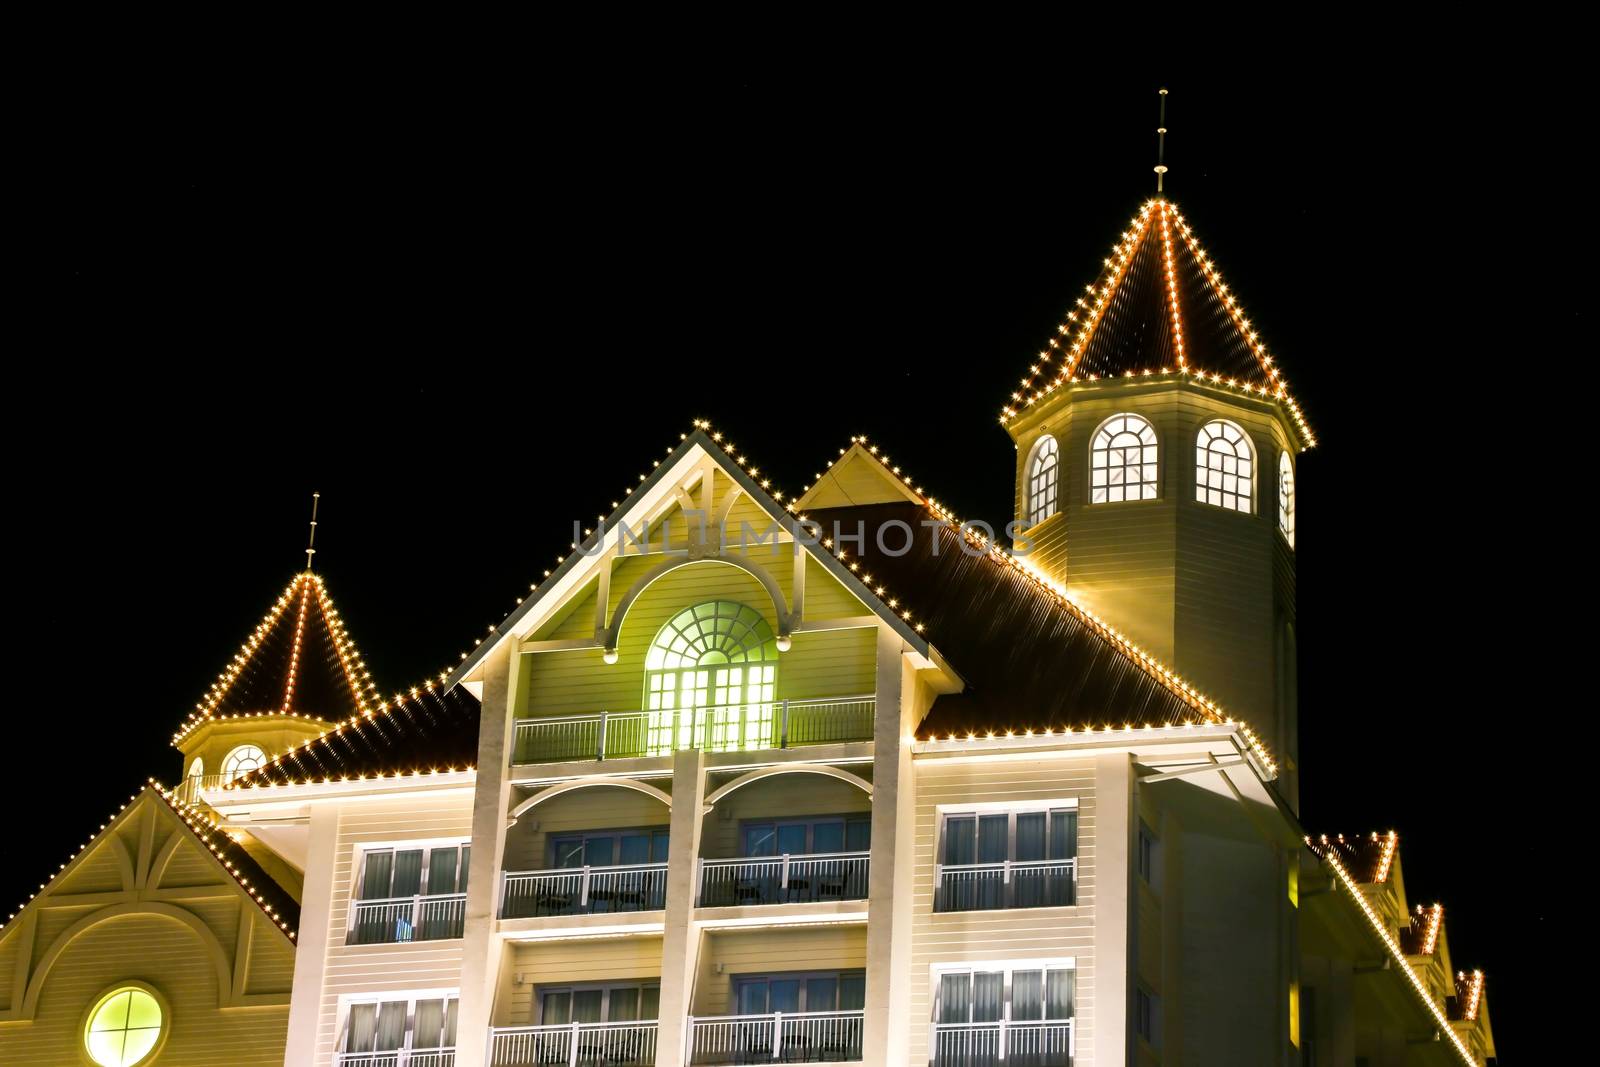 Decorative lights on a building with towers at night